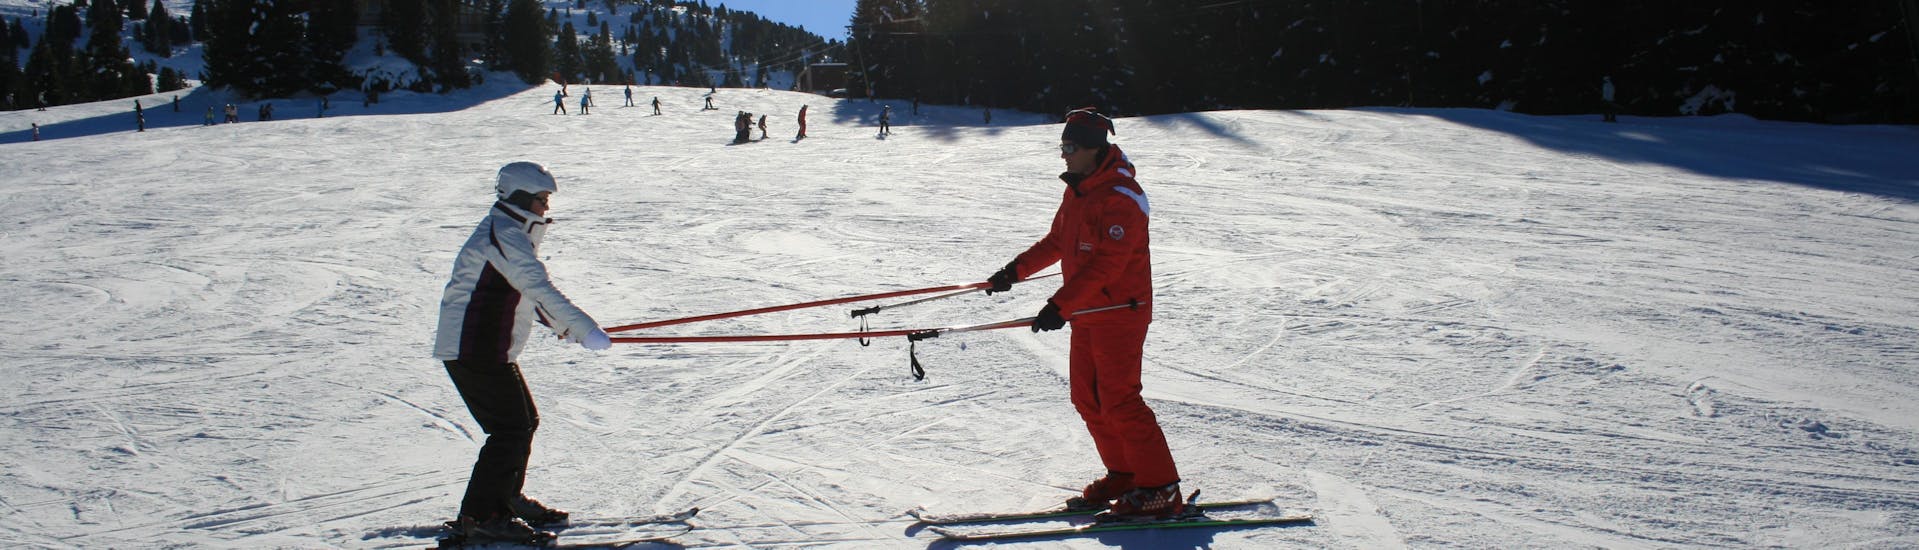 A beginner skier is practicing some basic techniques with their ski instructor from the ski school Skischule Lechner during the Private Ski Lessons for Adults - All Levels.